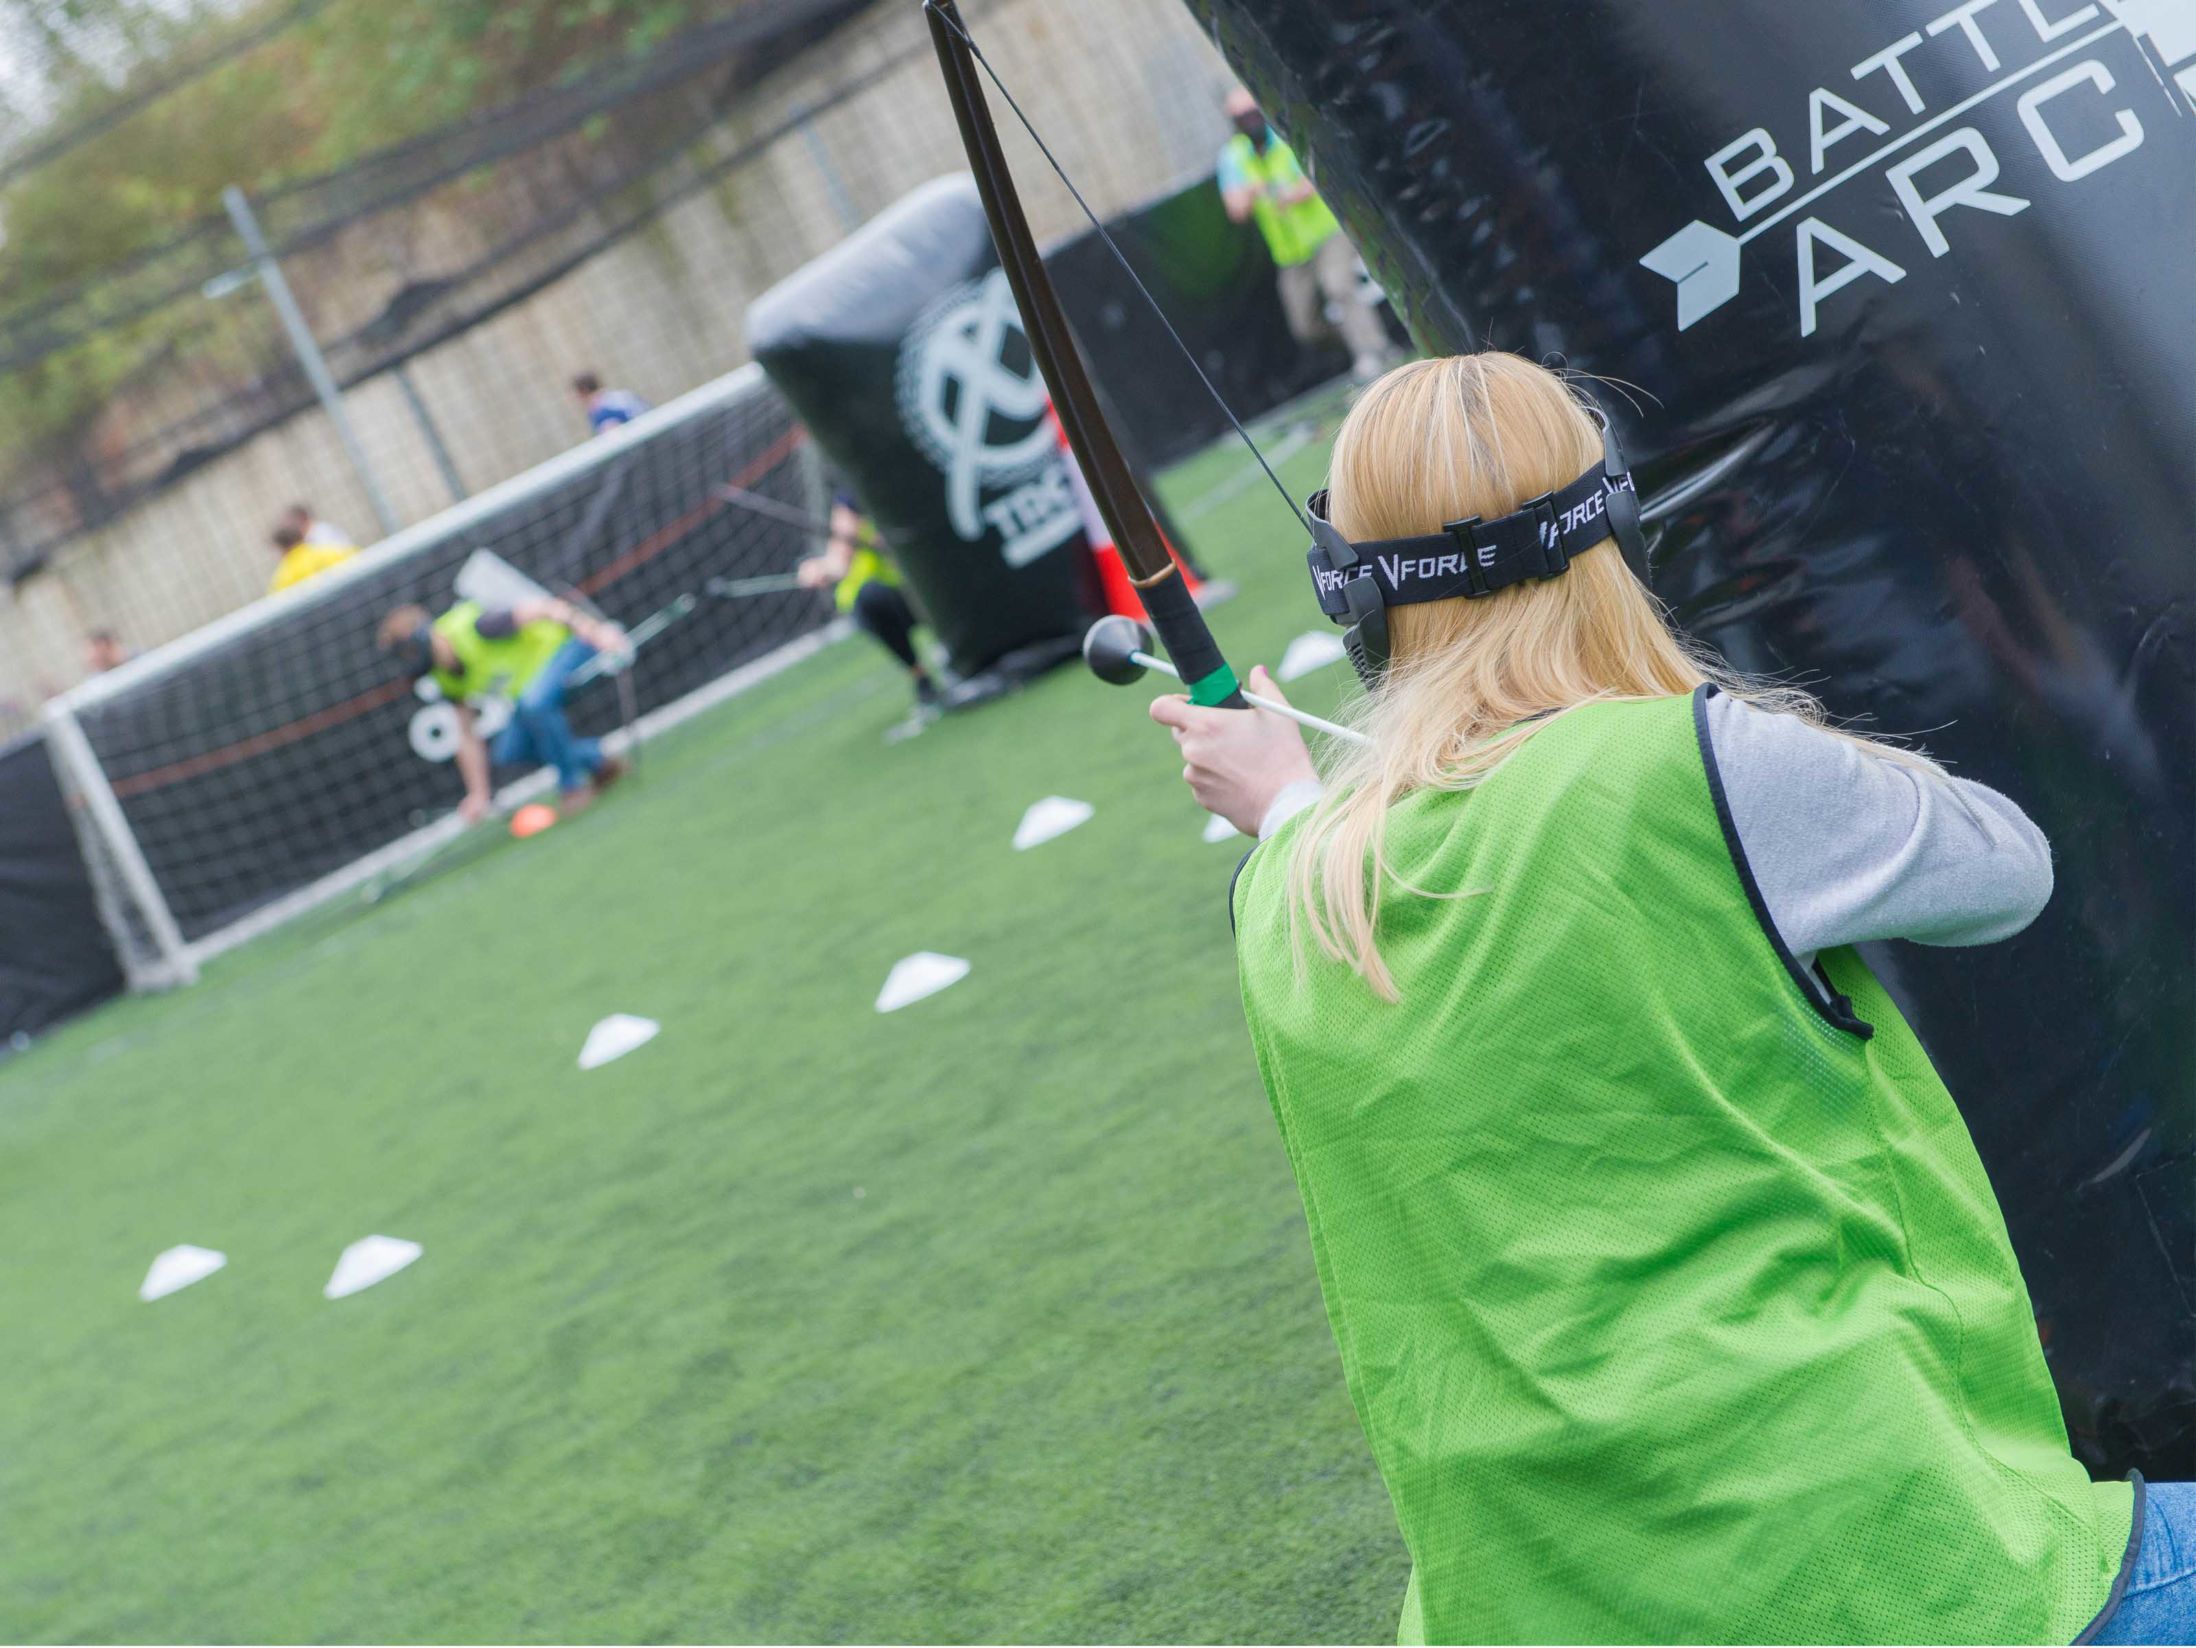 Healthy, Sporty & Active Hen Party Ideas you'll Love - Combat Archery Tag